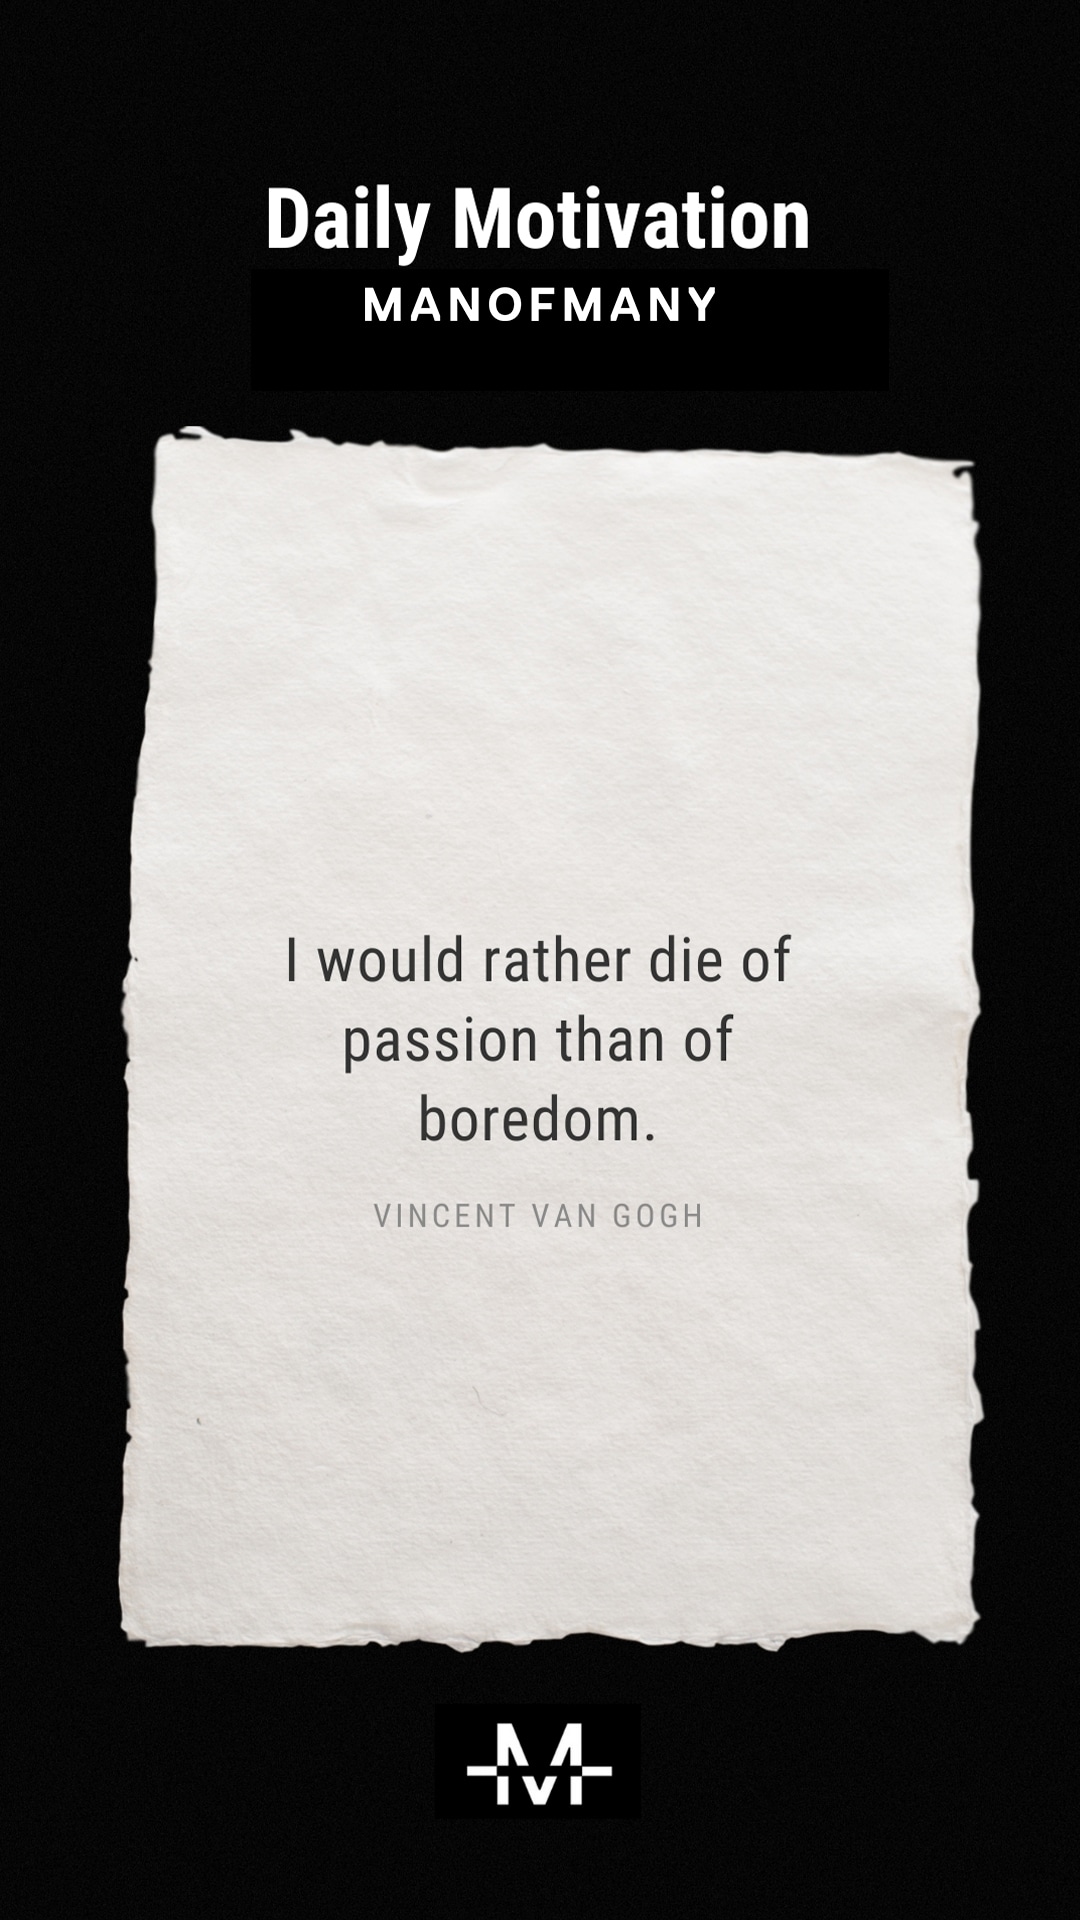 I would rather die of passion than of boredom. –Vincent van Gogh quote